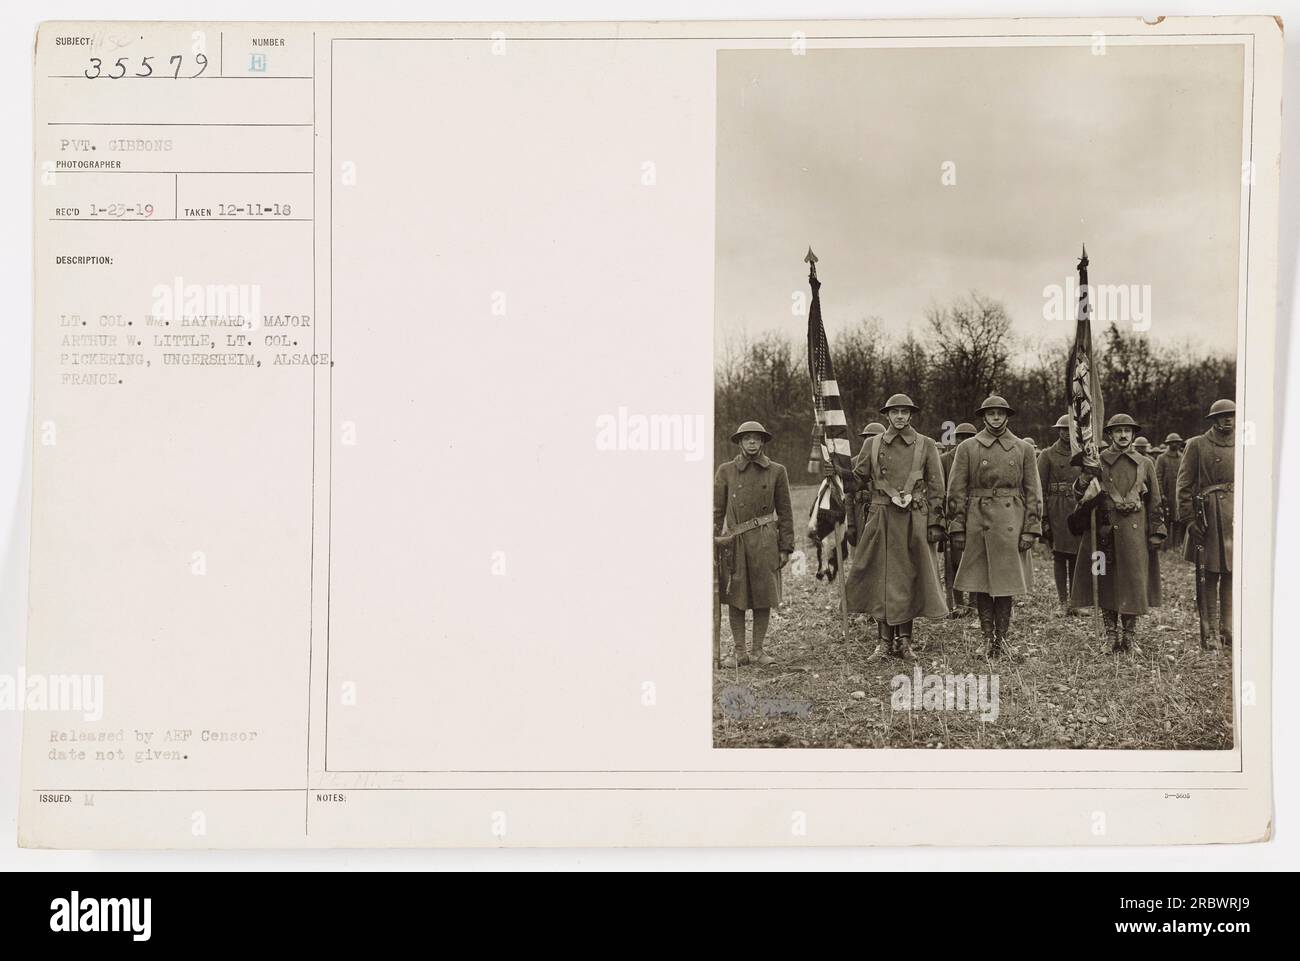 Pvt. Gibbons captured a photograph on December 11, 1918, depicting Lt. Col. William Hayward, Major Arthur W. Little, and Lt. Col. Pickering in Ungersheim, Alsace, France. The image was officially released by AEP censor, but the exact date is unknown. This image is a part of the 369th Infantry collection during World War One. Stock Photo